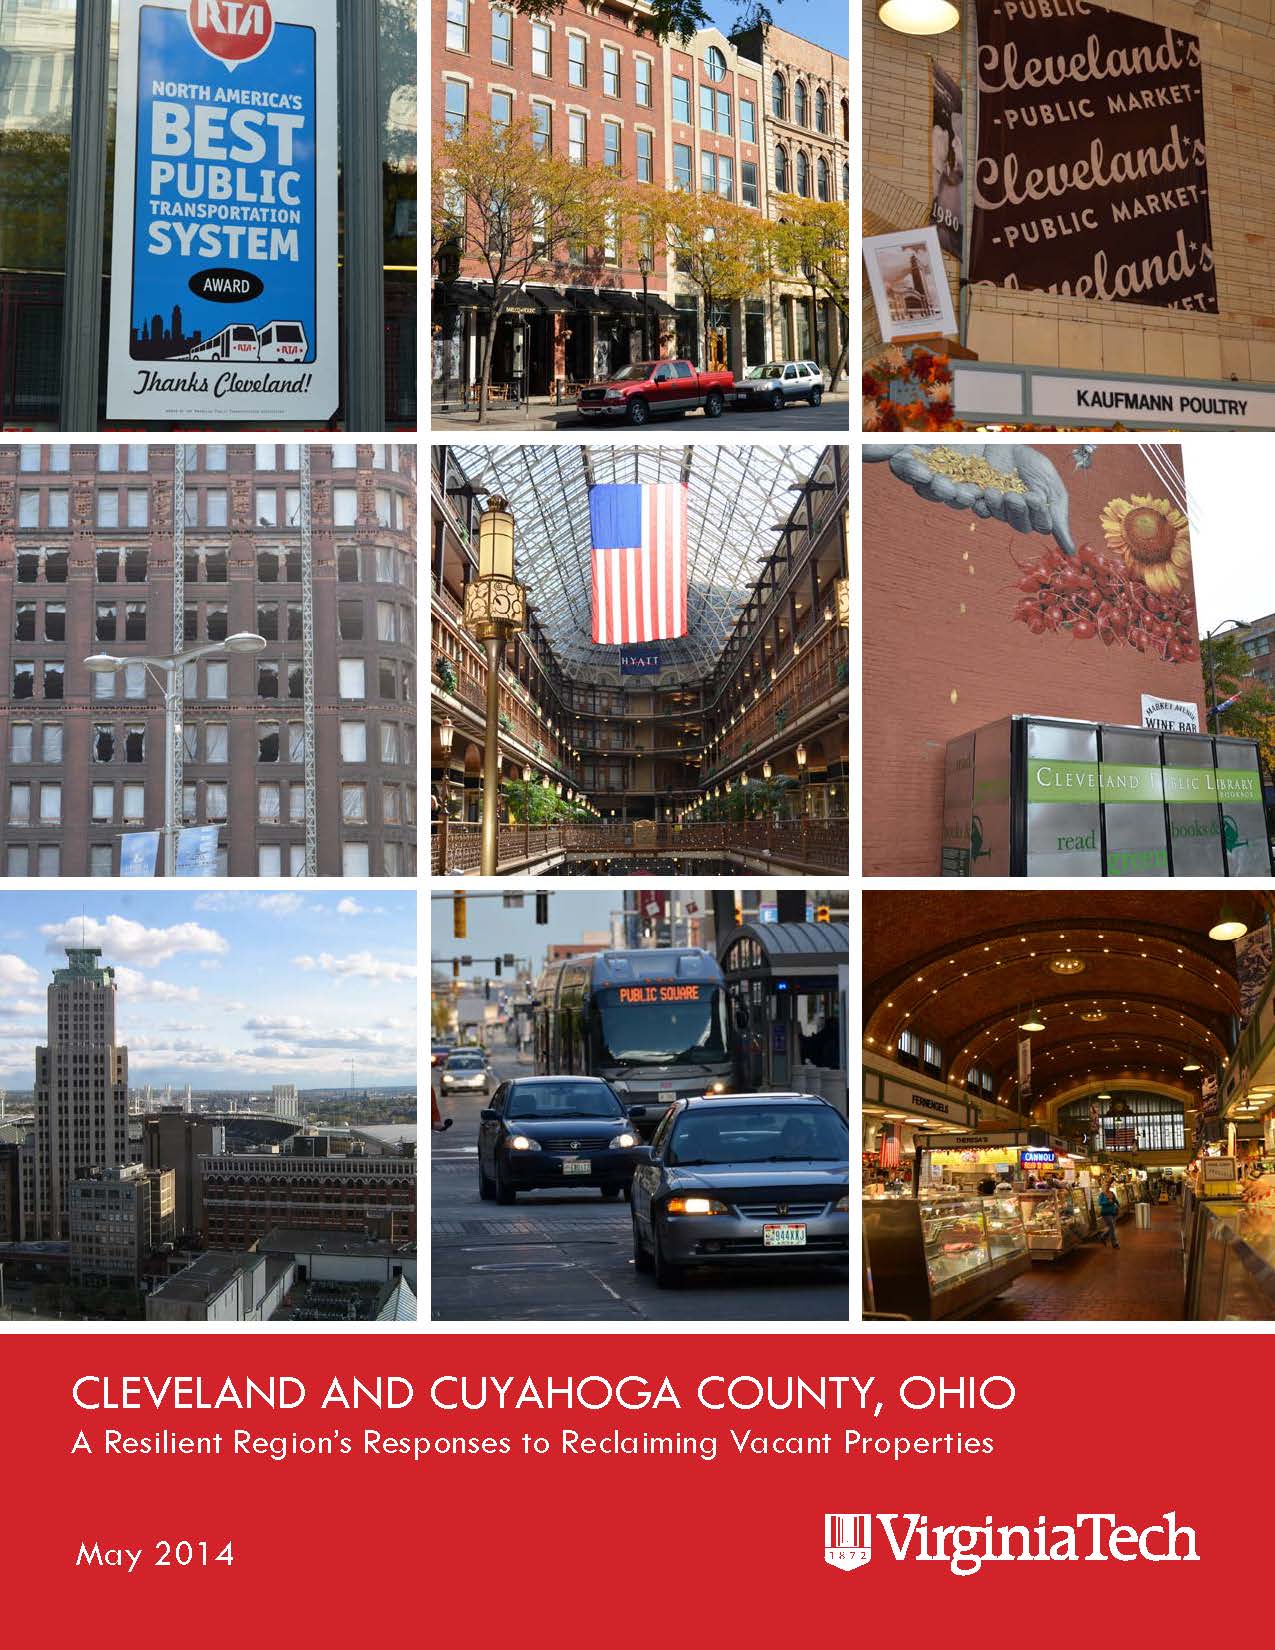 Cleveland and Cuyahoga County, Ohio: A Resilient Region’s Responses to Reclaiming Vacant Properties